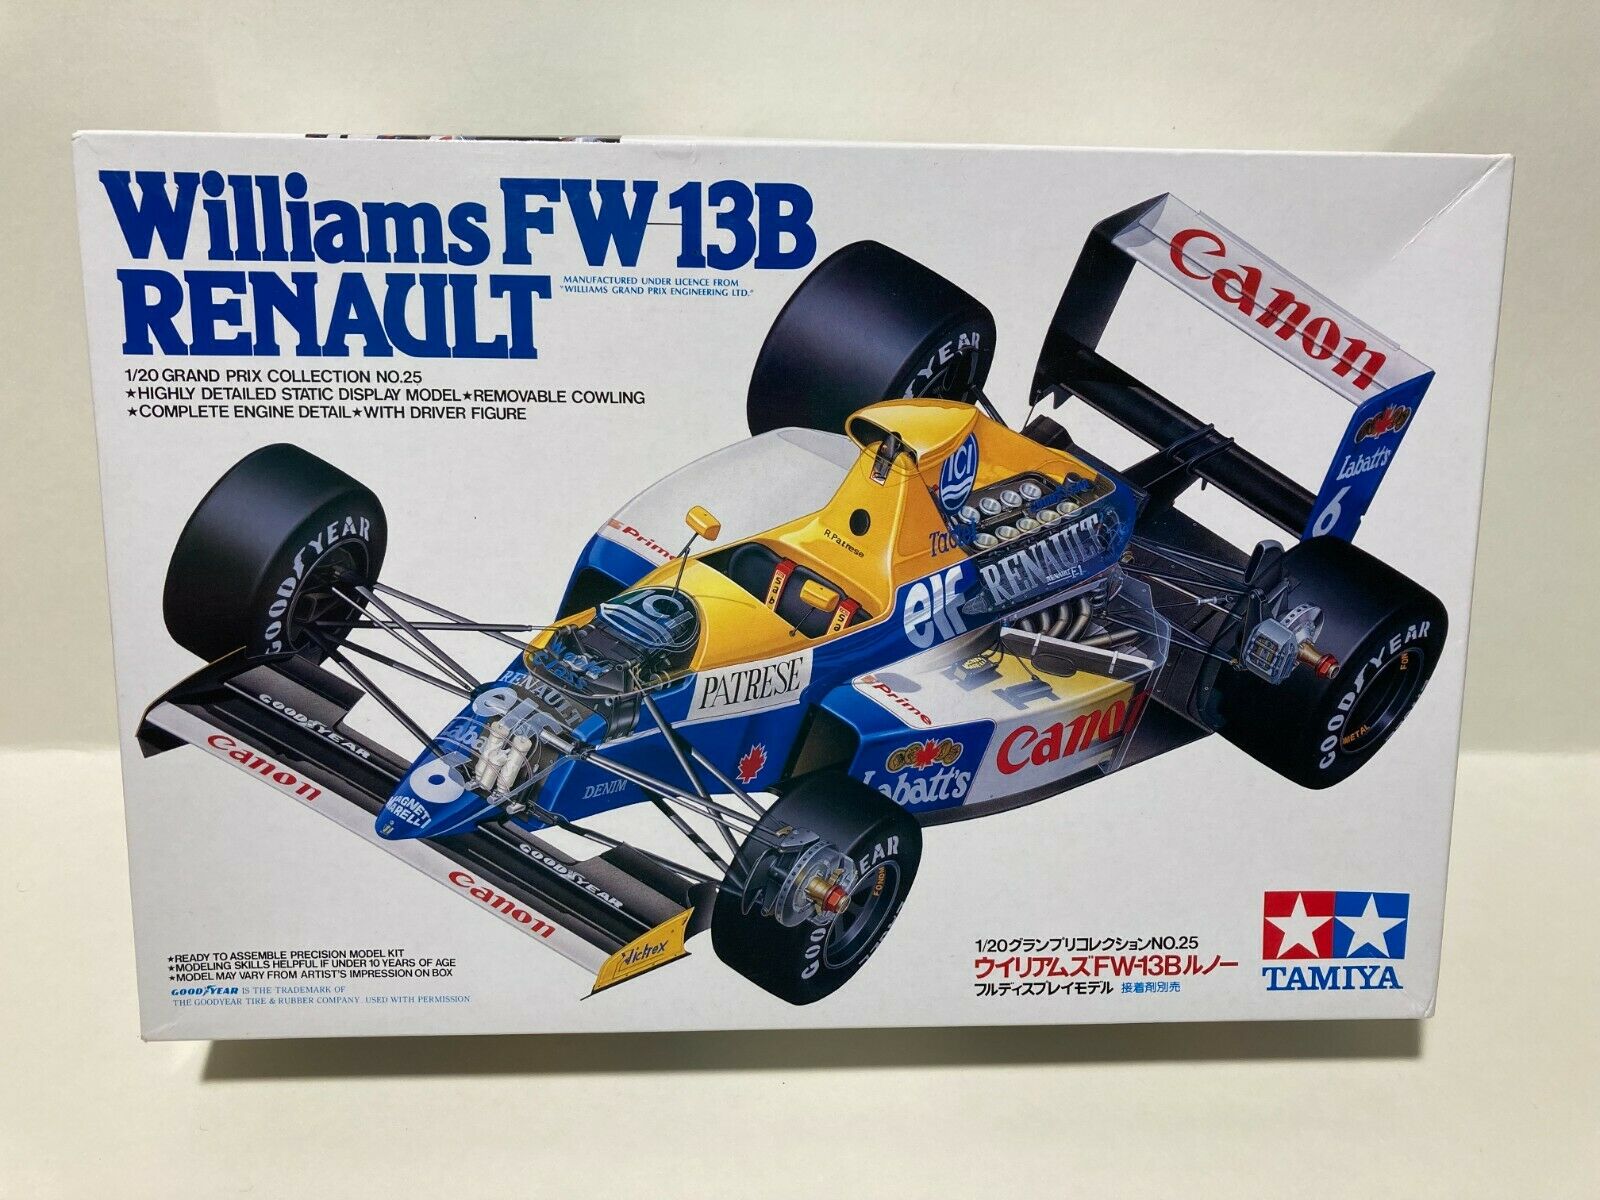 Tamiya 1/20 Williams Renault Fw-13b #20025 W/indycals Car And Tire Decals.